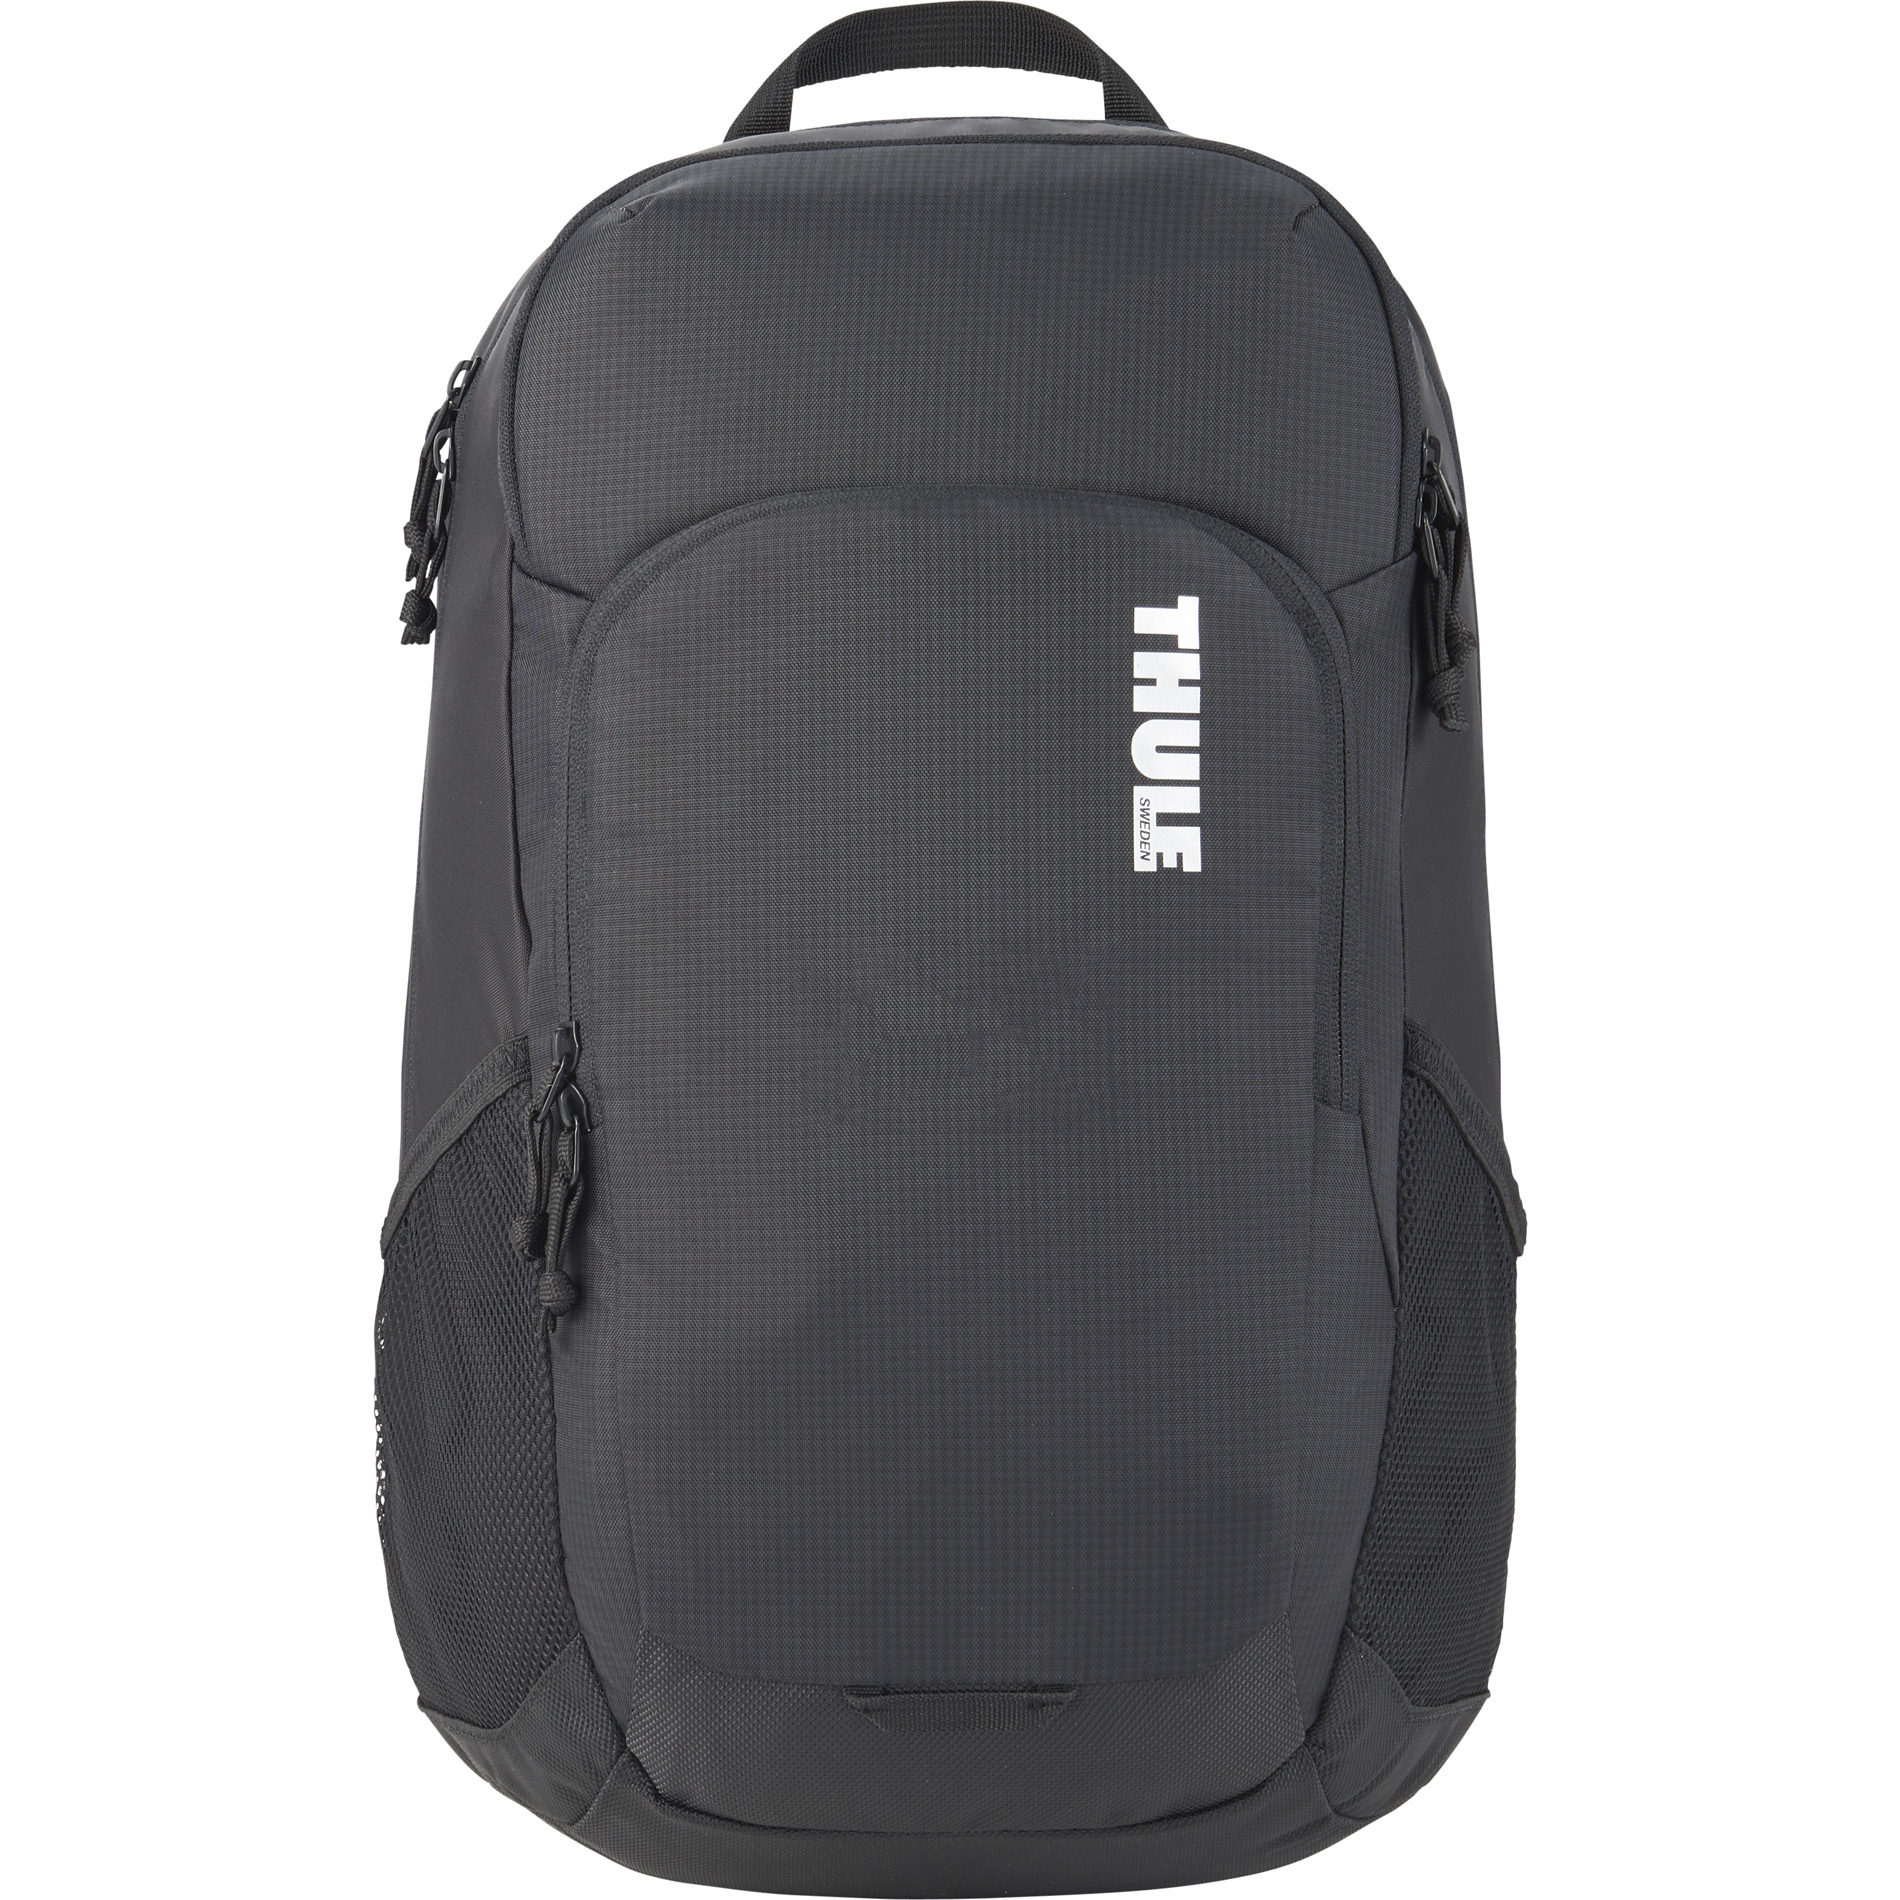 Thule 9020-39 - Achiever 15" Computer Backpack